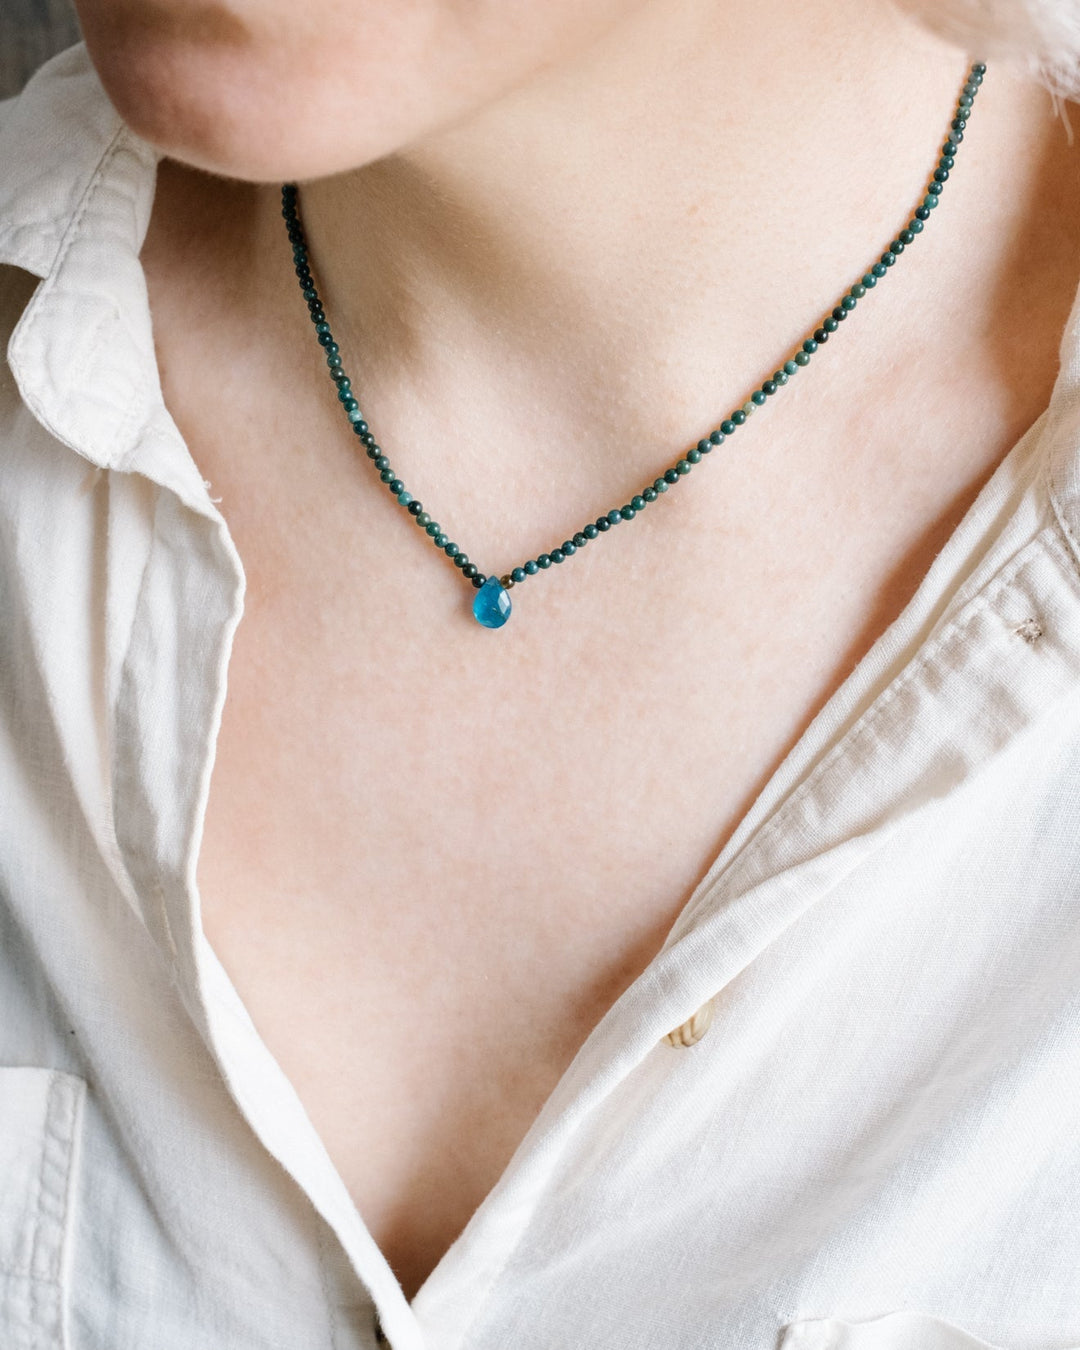 Neon Blue Apatite Beaded Necklace - The Healing Pear